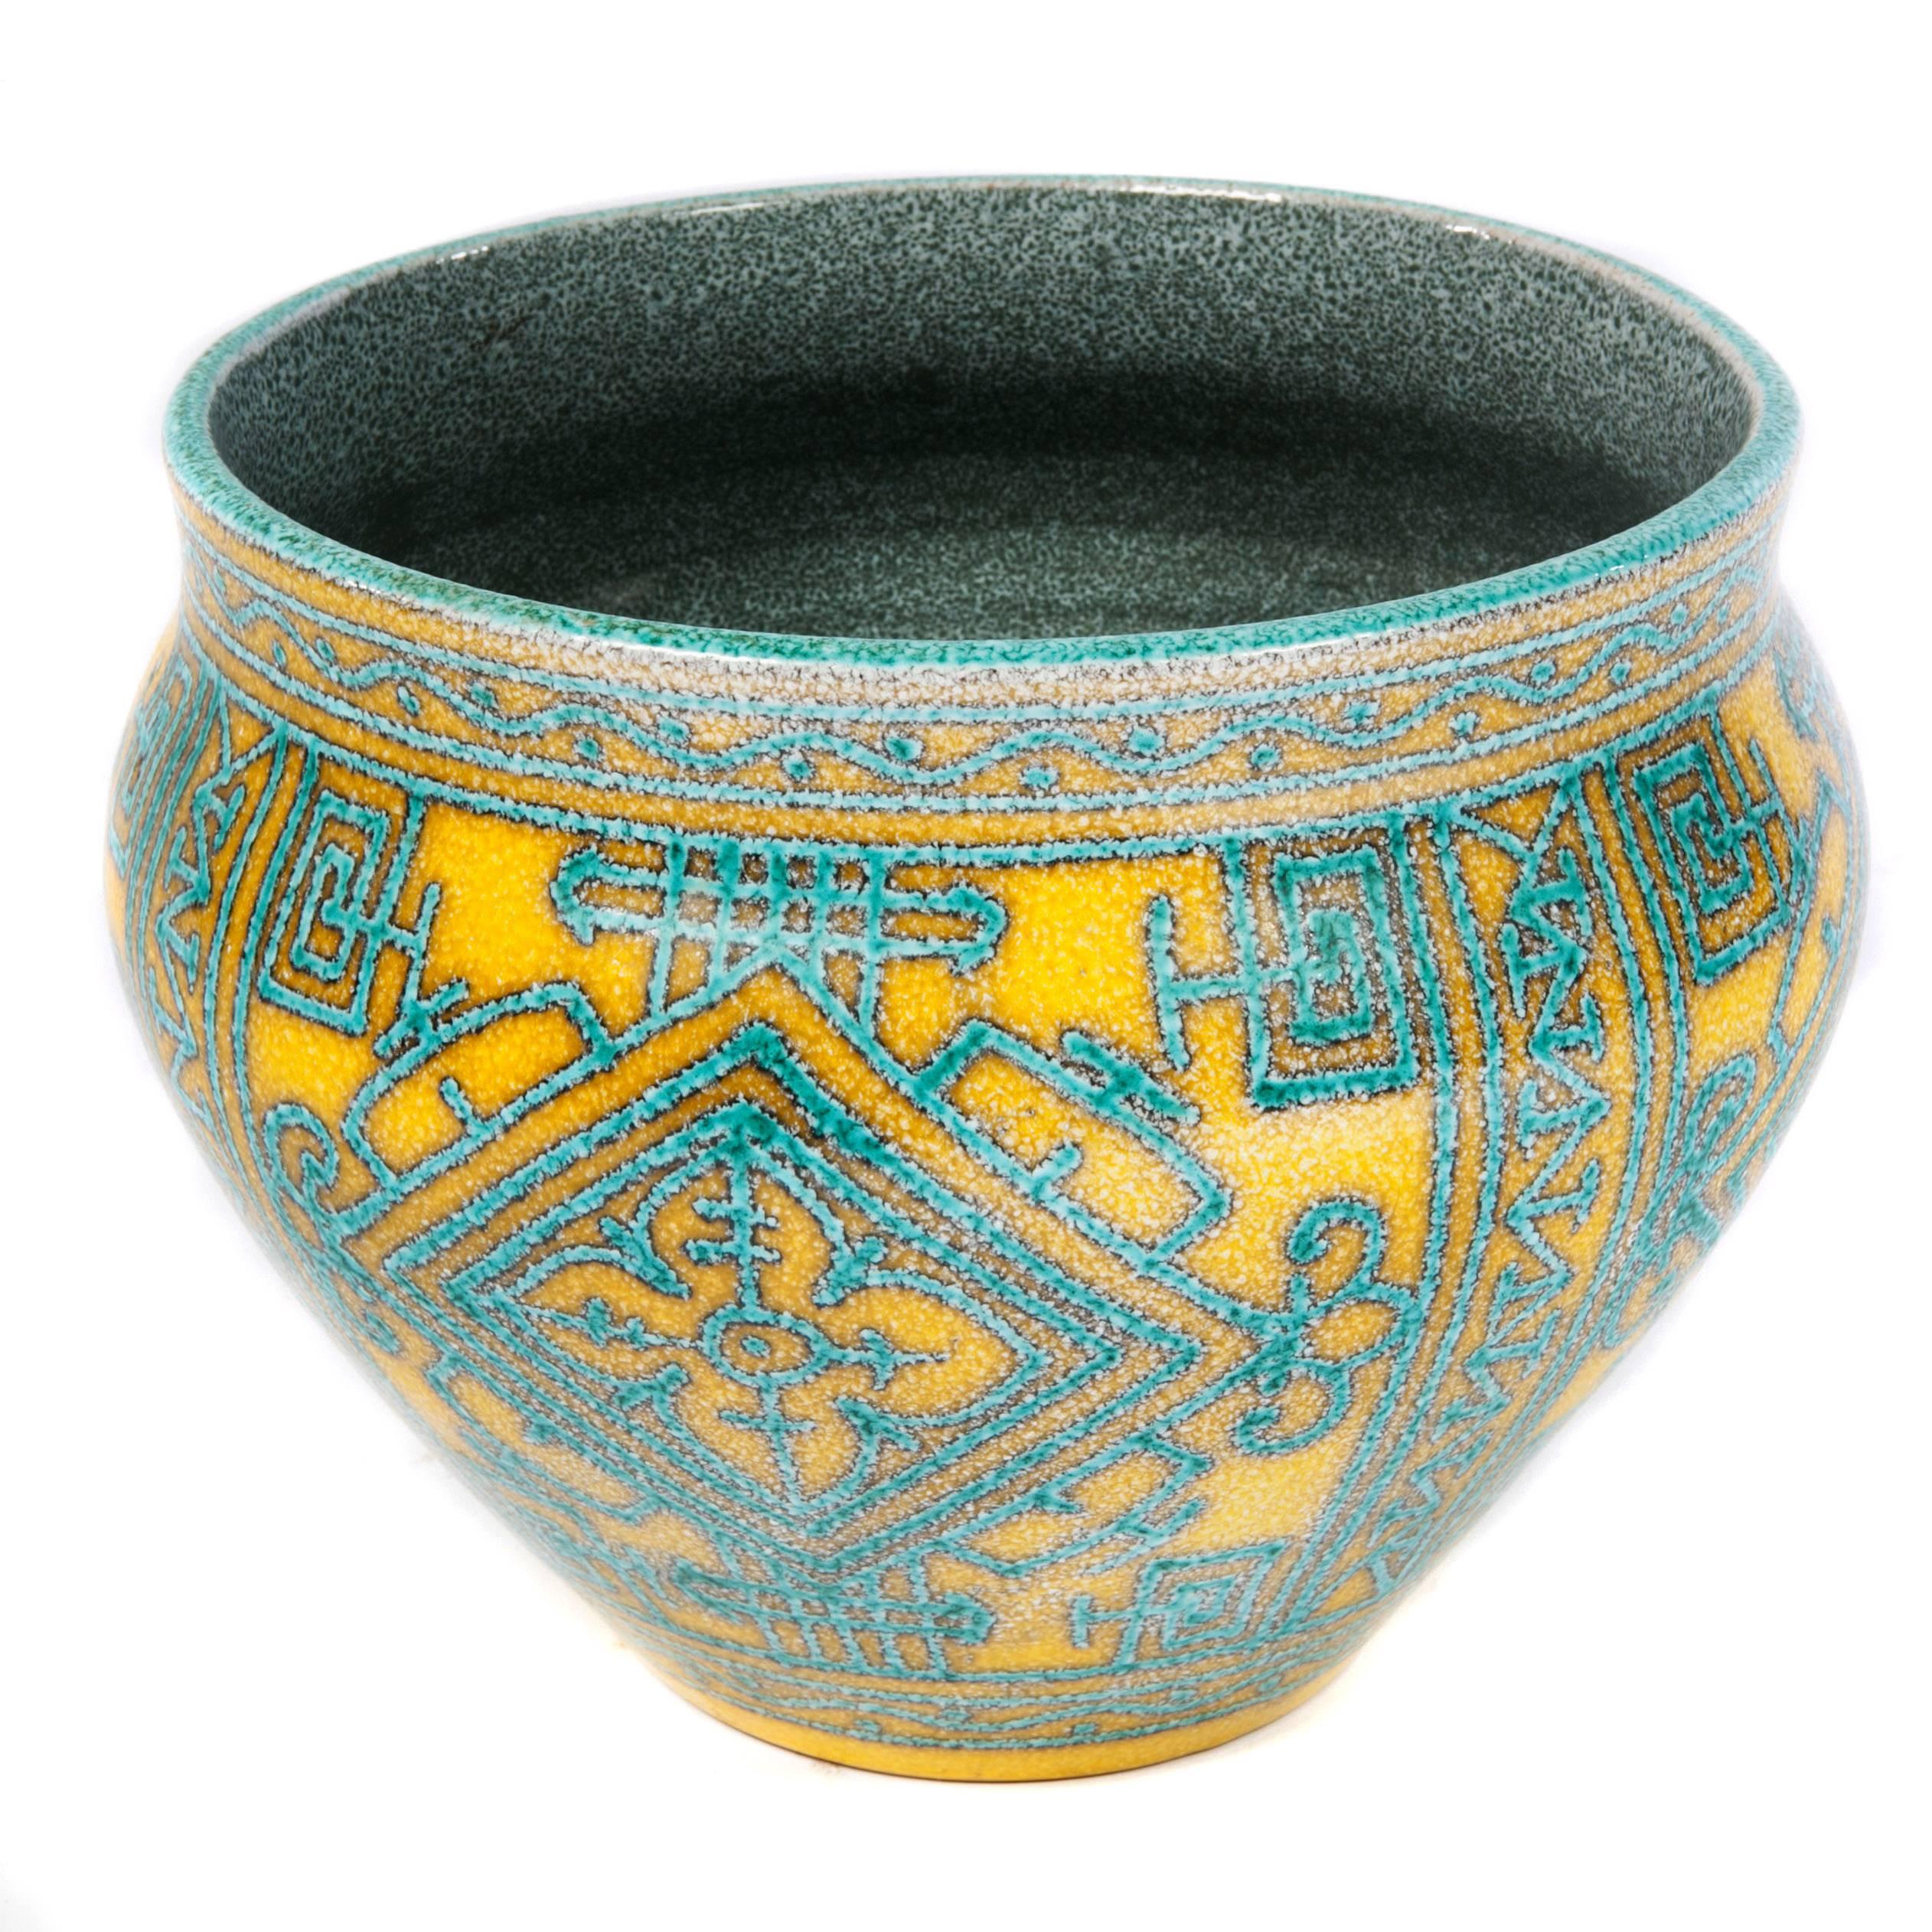 This colorful jardiniere is a fine example of 1960s Italian ceramics. The canary-yellow background is enhanced by a geometric design in turquoise; interior is blue. Signed 